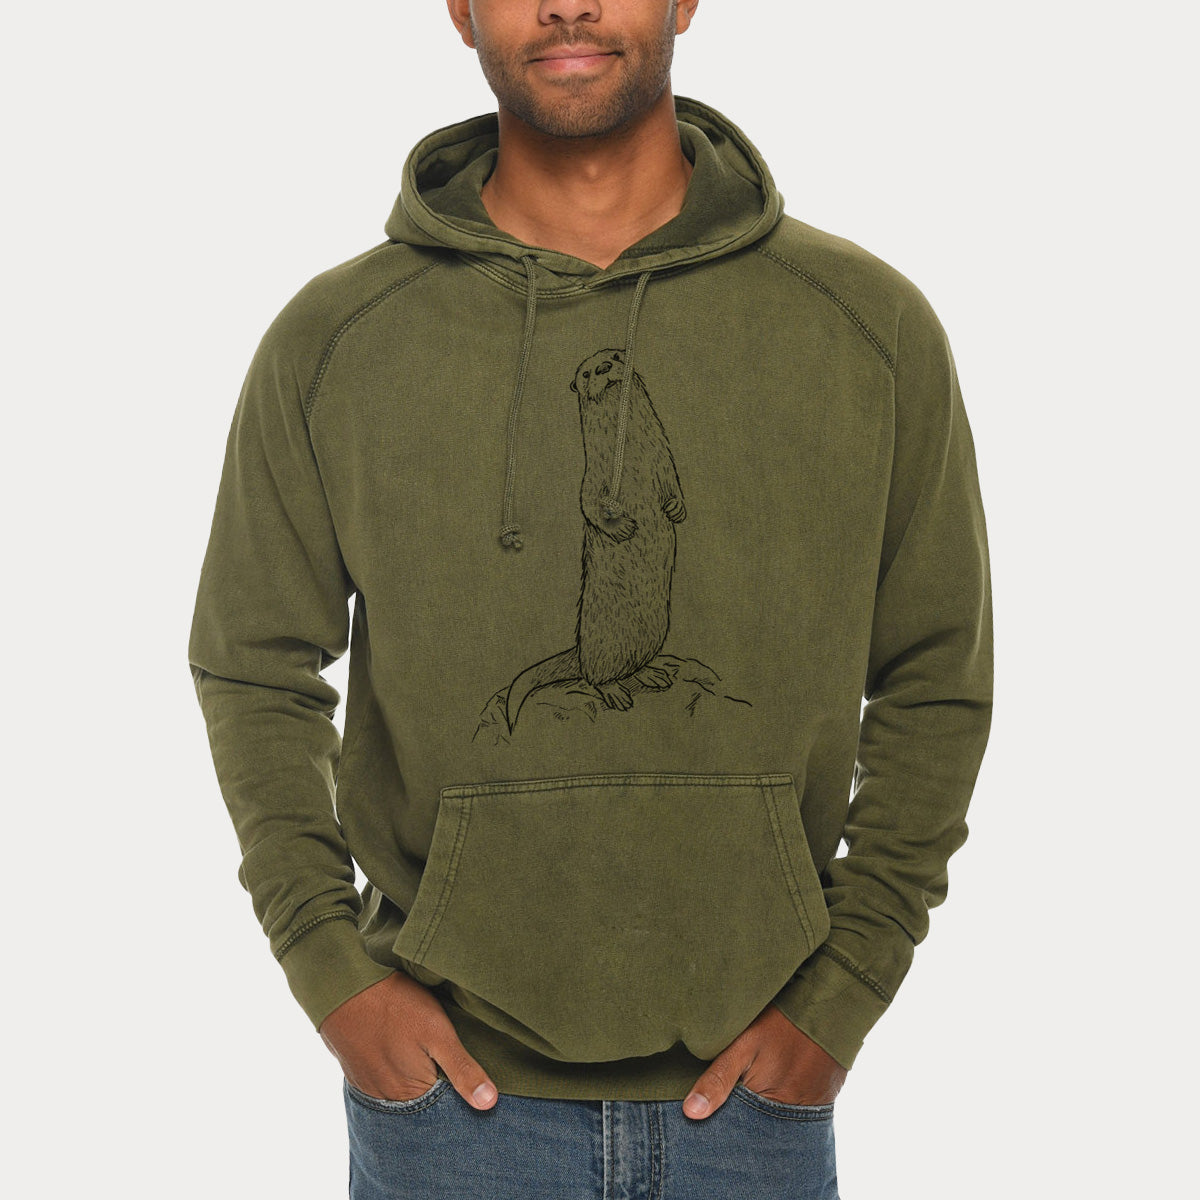 North American River Otter - Lontra canadensis  - Mid-Weight Unisex Vintage 100% Cotton Hoodie